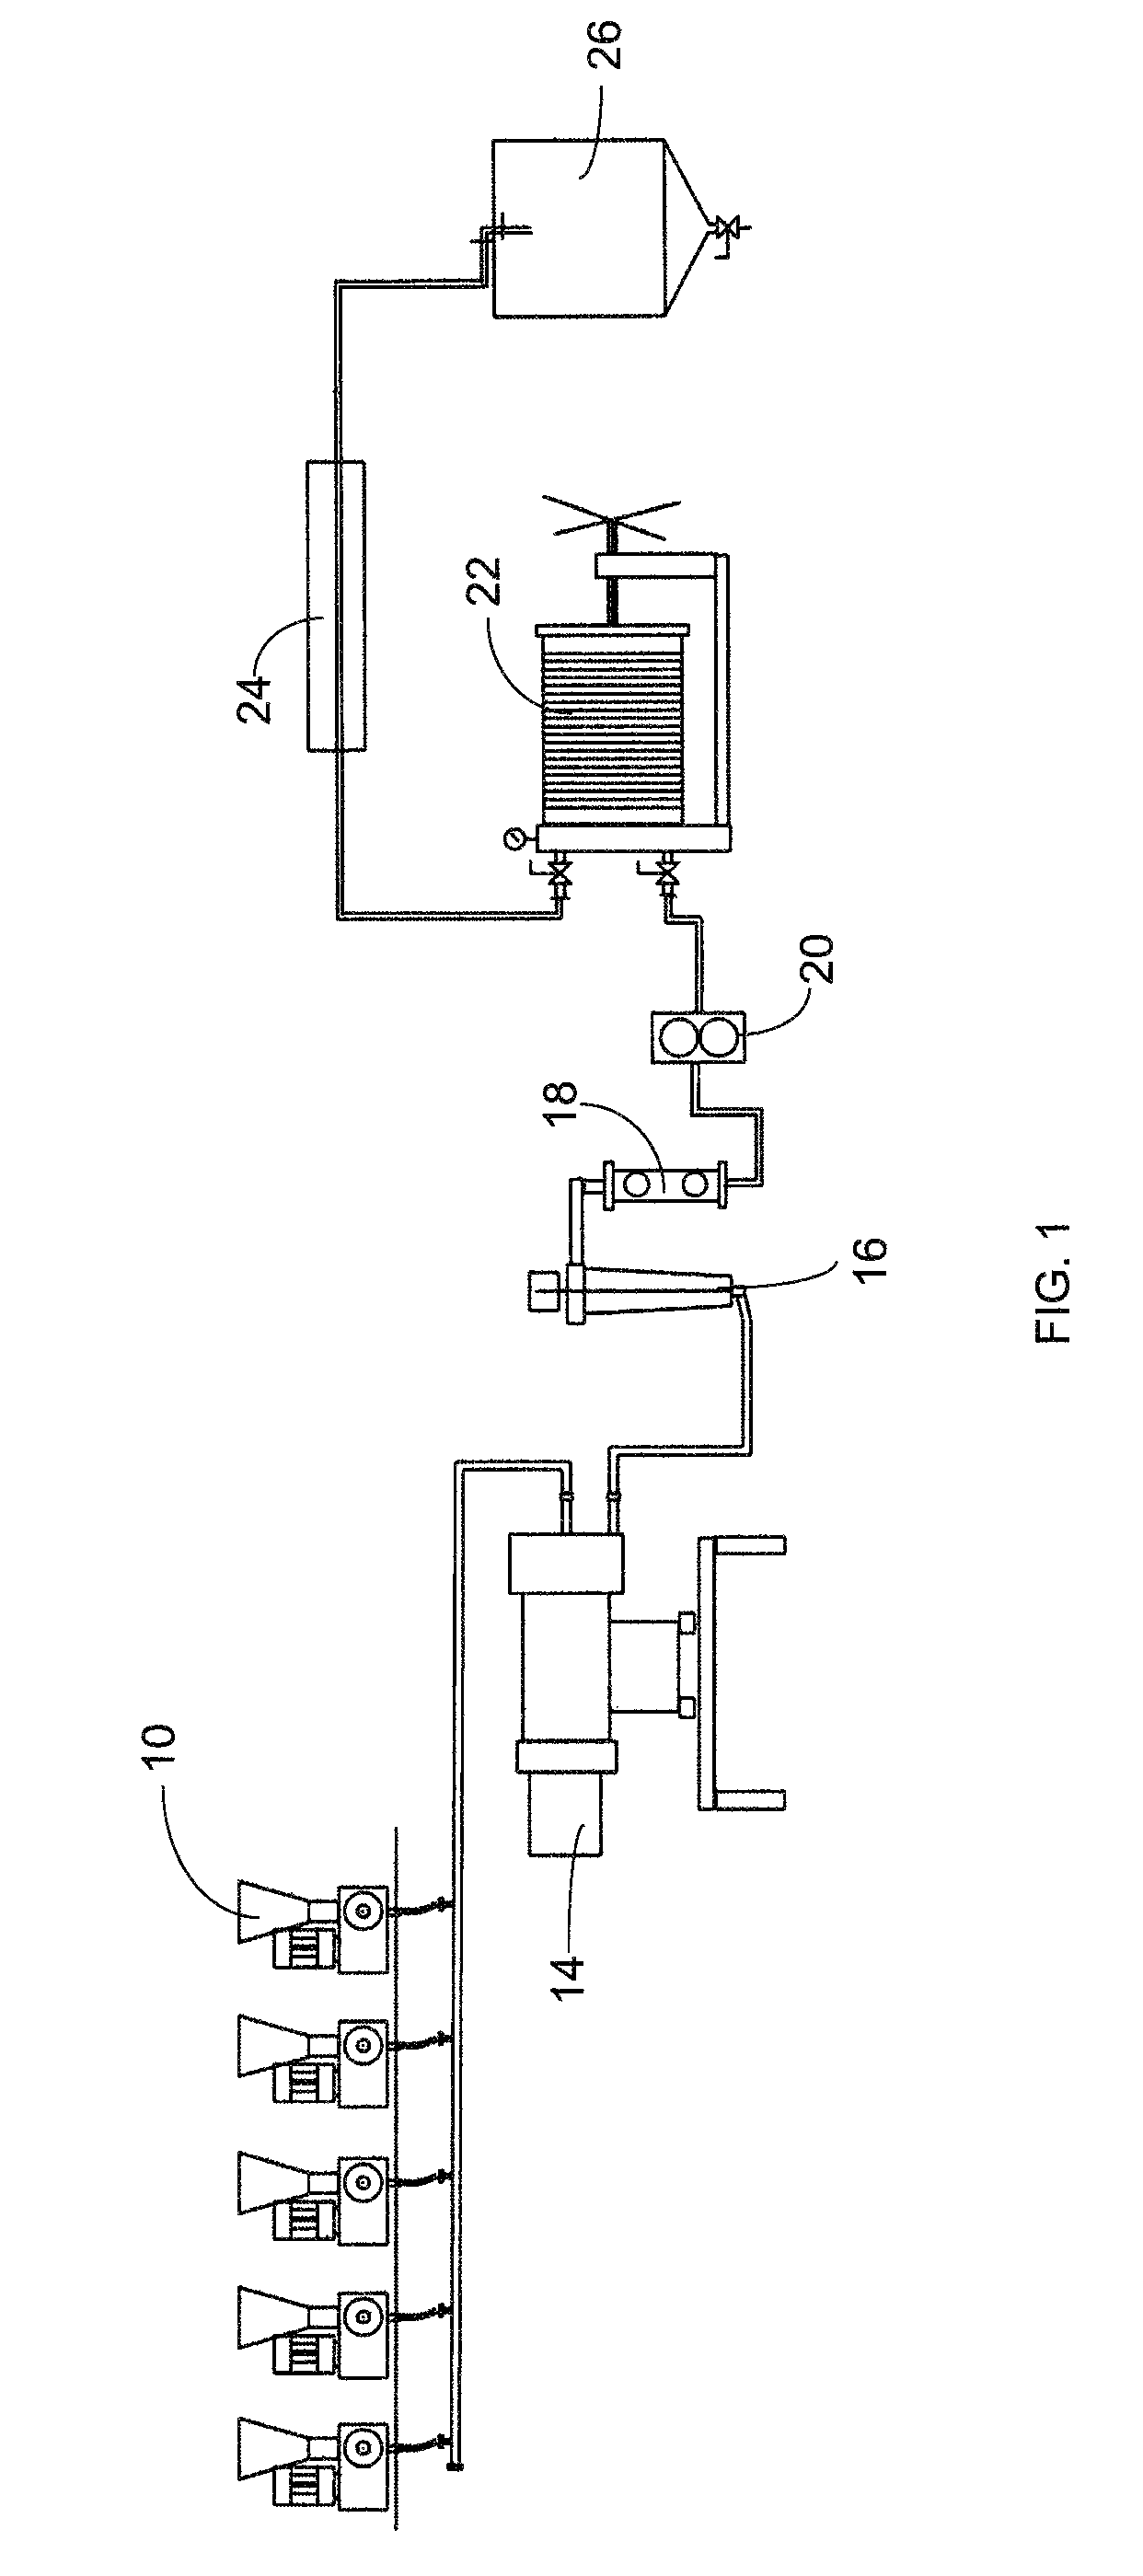 Nutritional food oil compositions and methods of making same